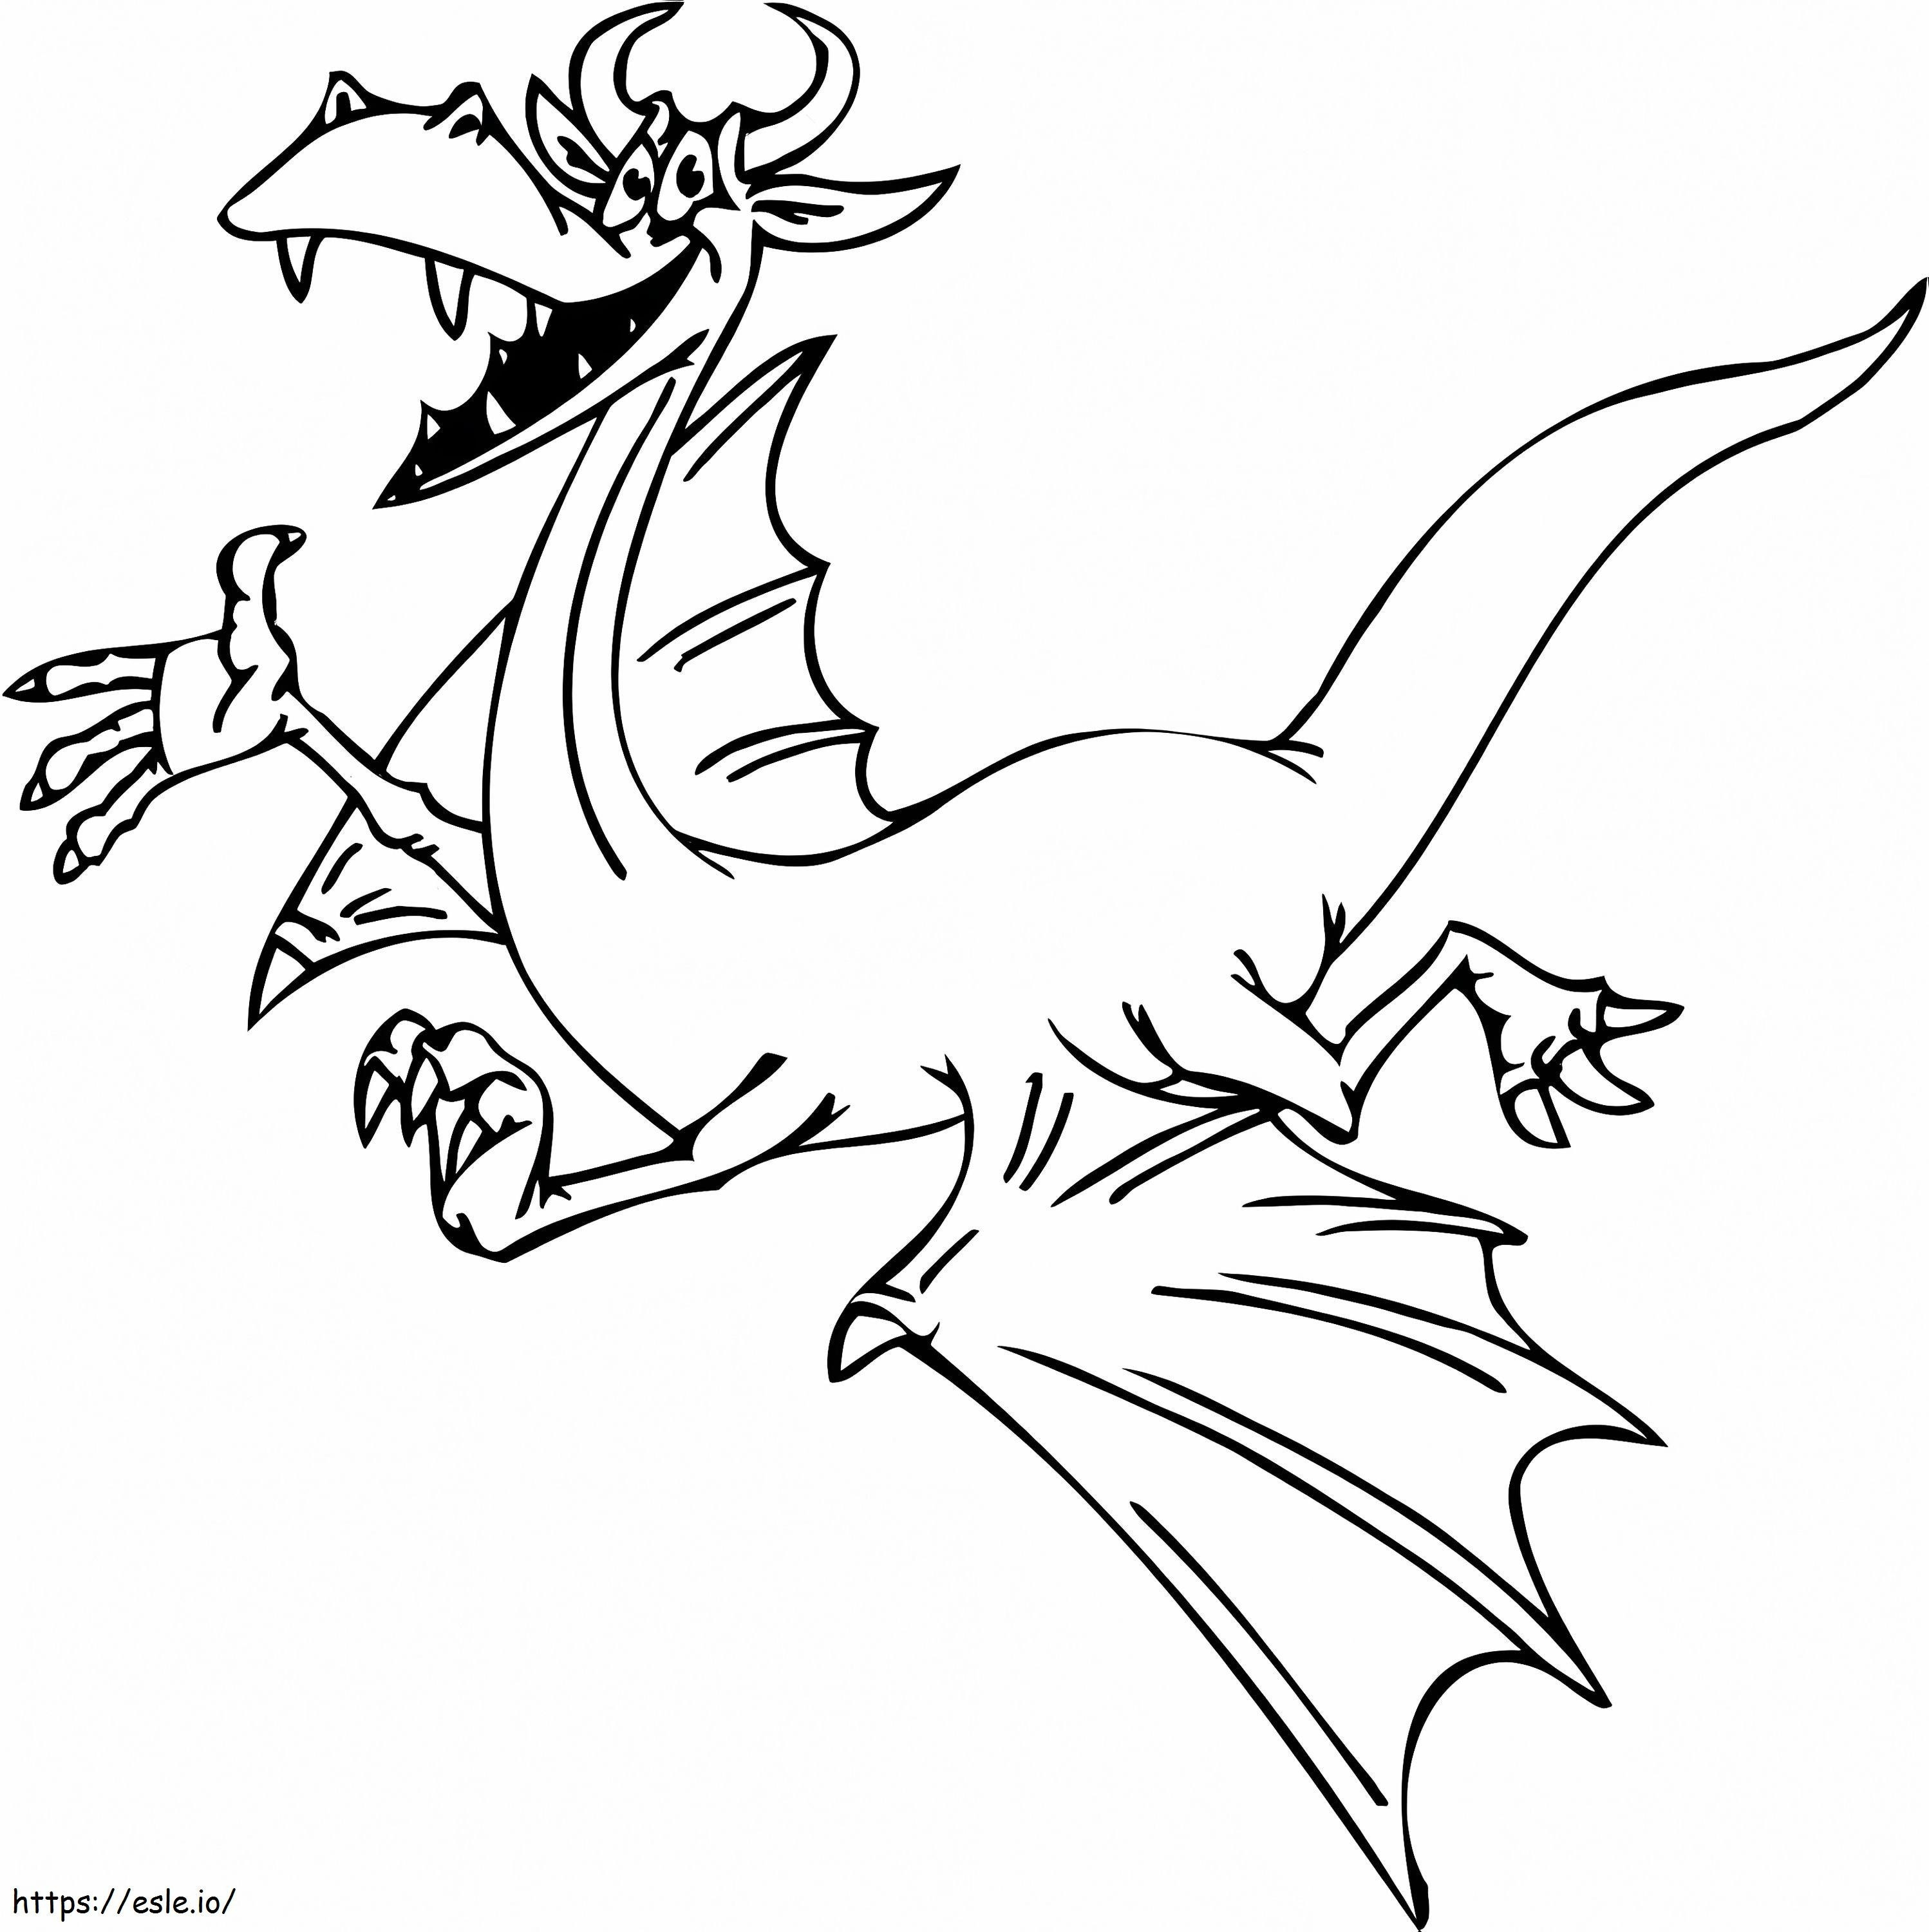 Friendly Dragon coloring page